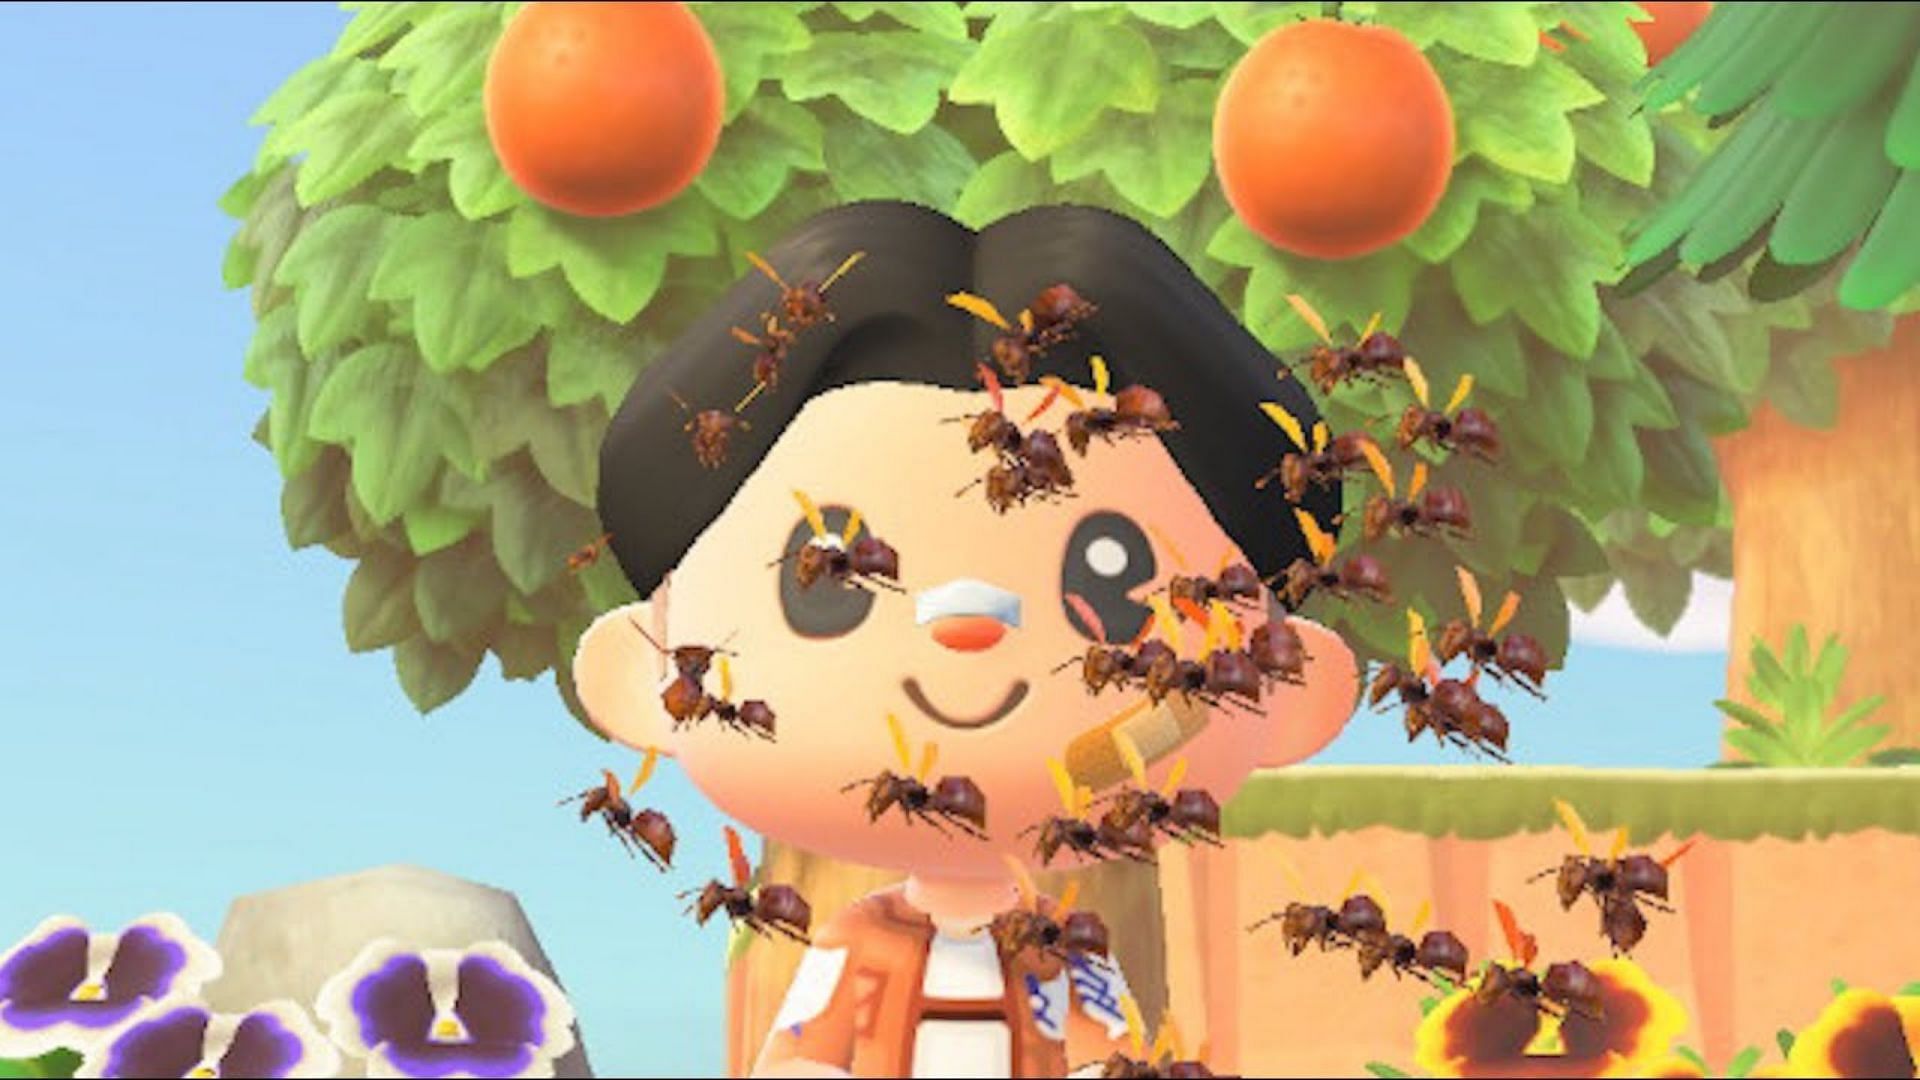 Animal Crossing: New Horizons players can try to avoid getting stung by wasps using this method (Image via seven toad/YouTube)